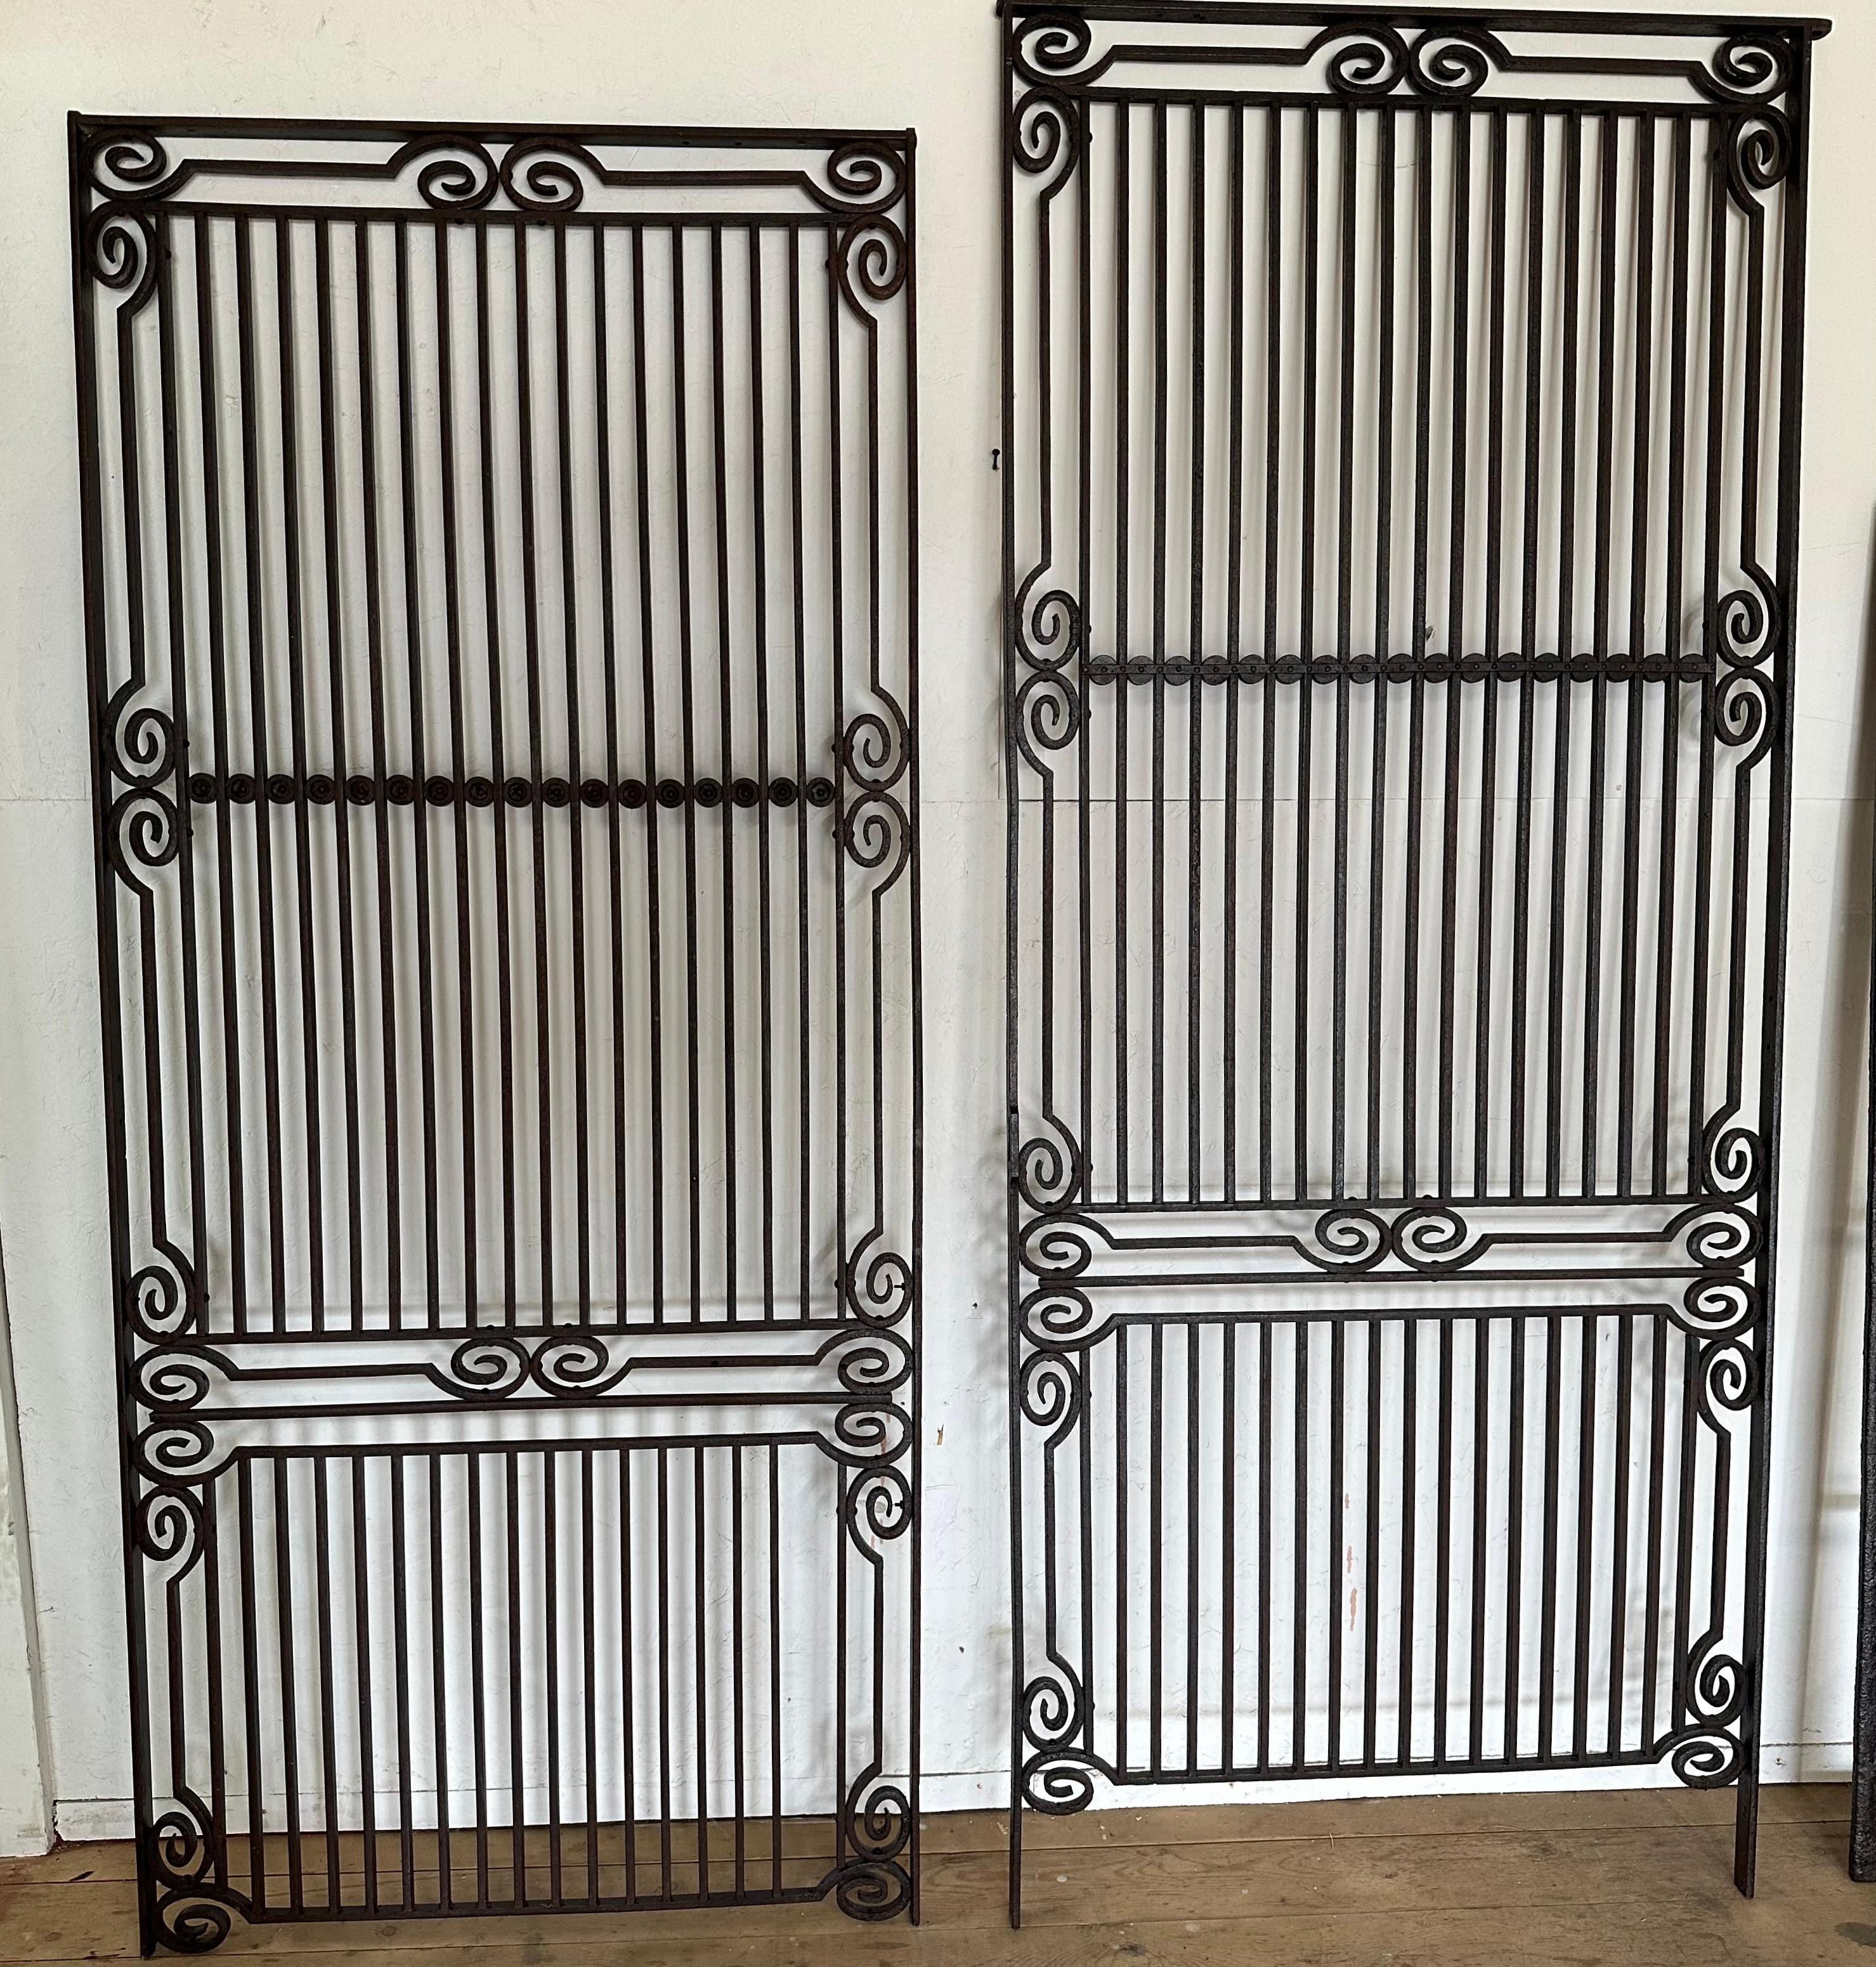 A Collection of 7 Antique Iron Gate or Fence Panels, Sold Singly For Sale 15